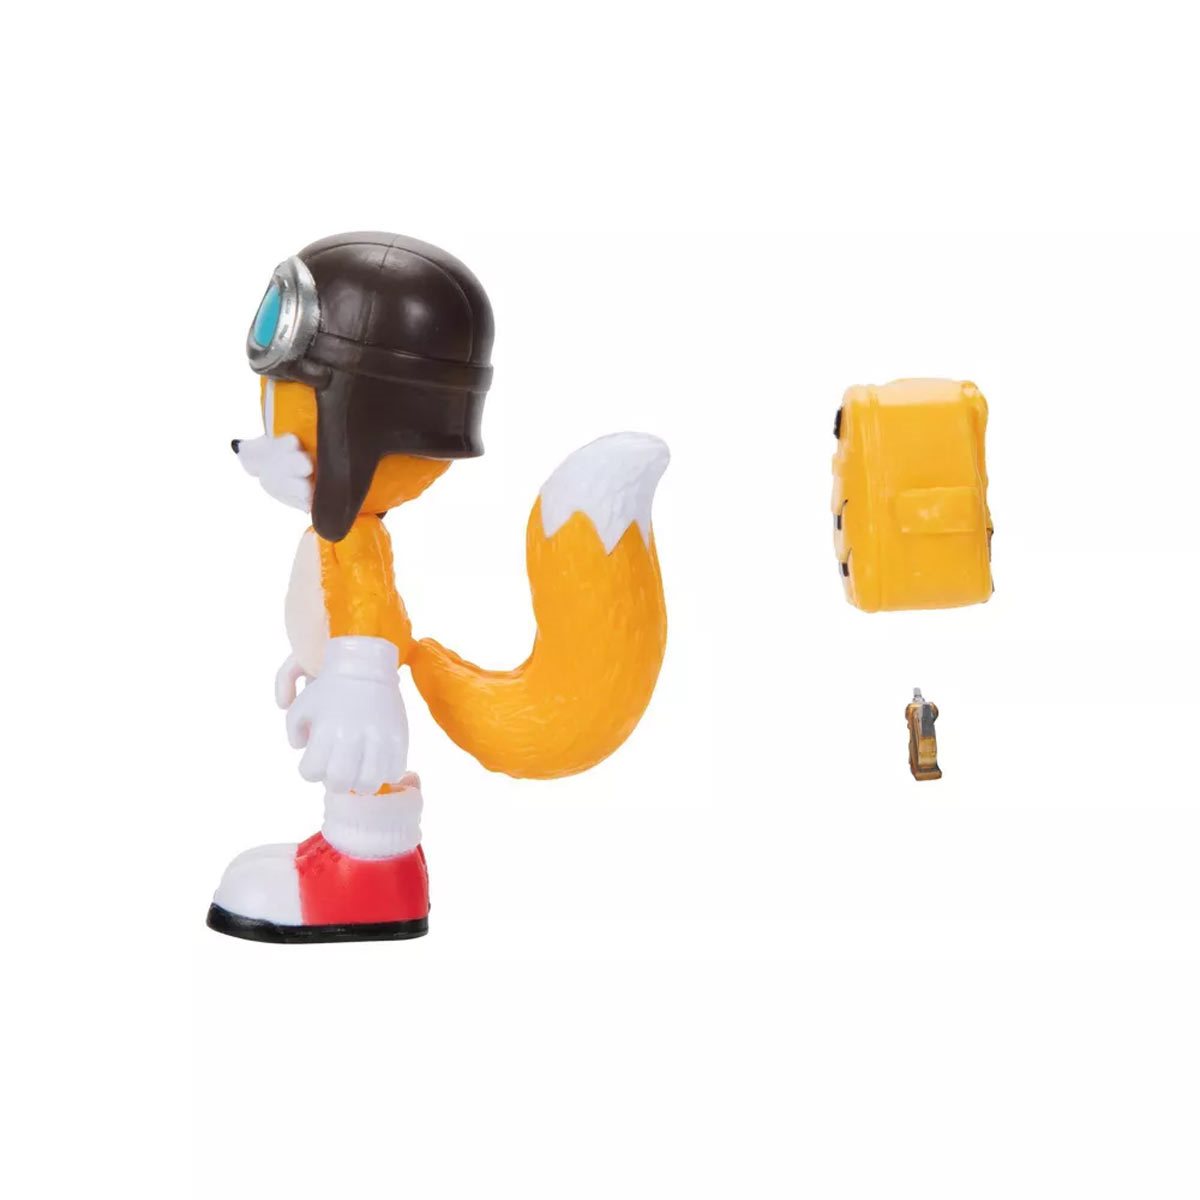 Sonic the Hedgehog 2 Movie Tails 4 Inch Action Figure – Insert